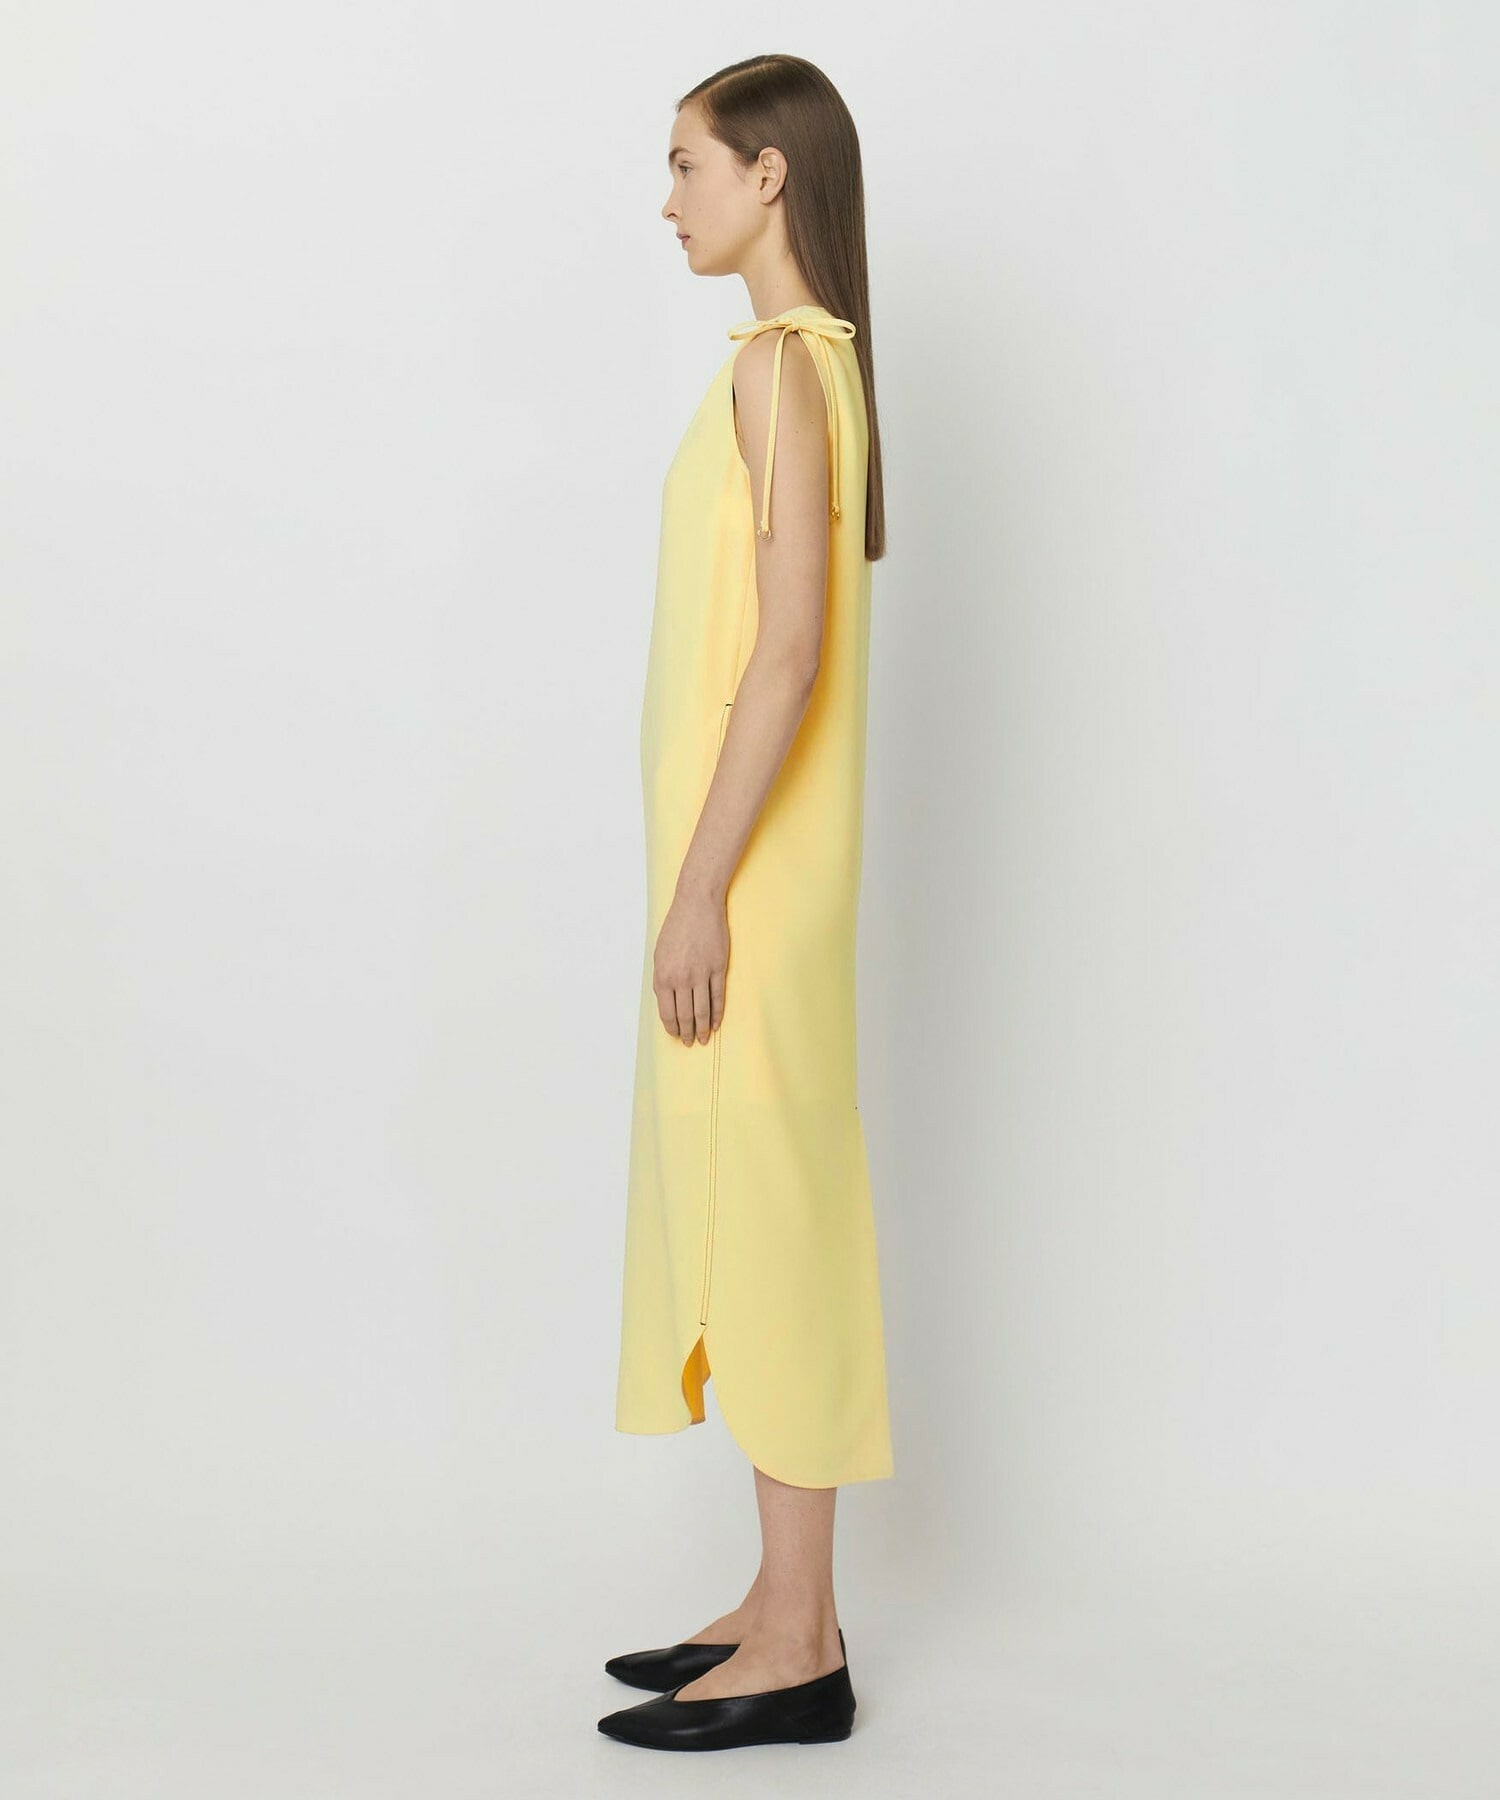 【yoshie inaba】LIGHT DOUBLE CLOTH SHOULDER GATHER BELTED DRESS 詳細画像 ブラック 3